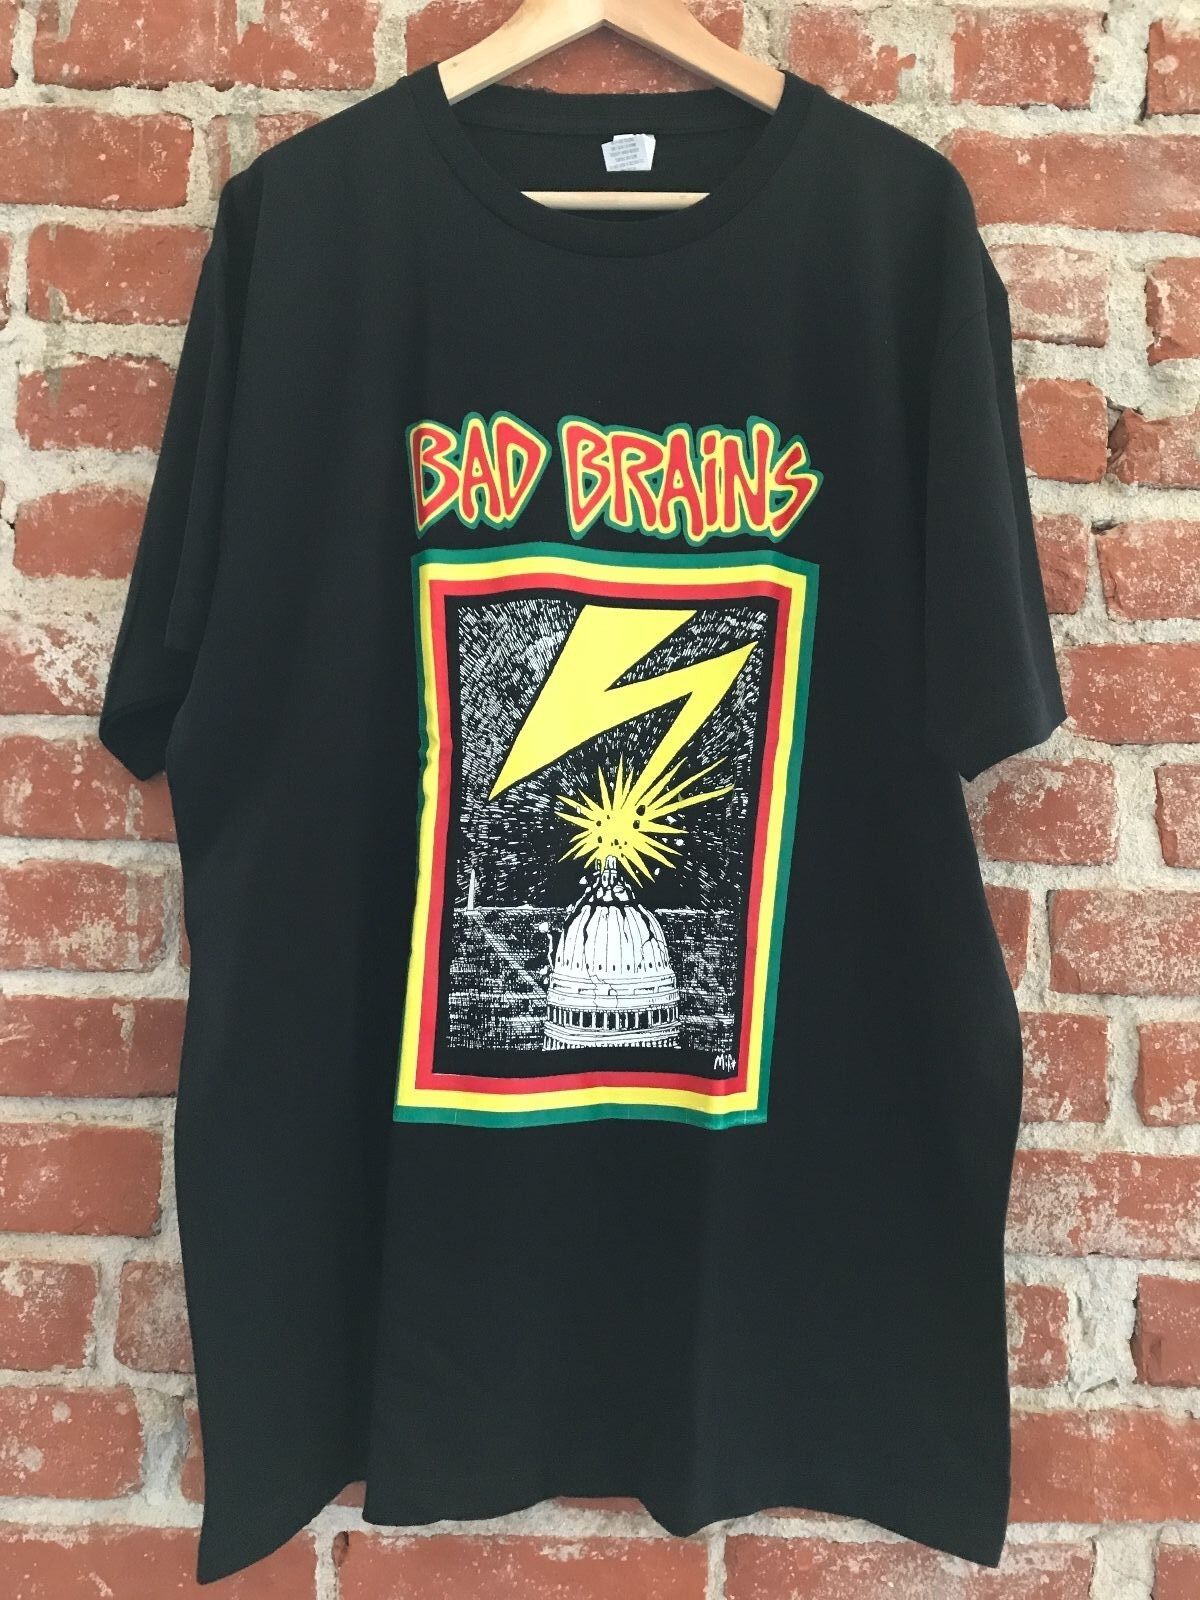 (Officially Licensed) Bad Brains Graphic T Shirt